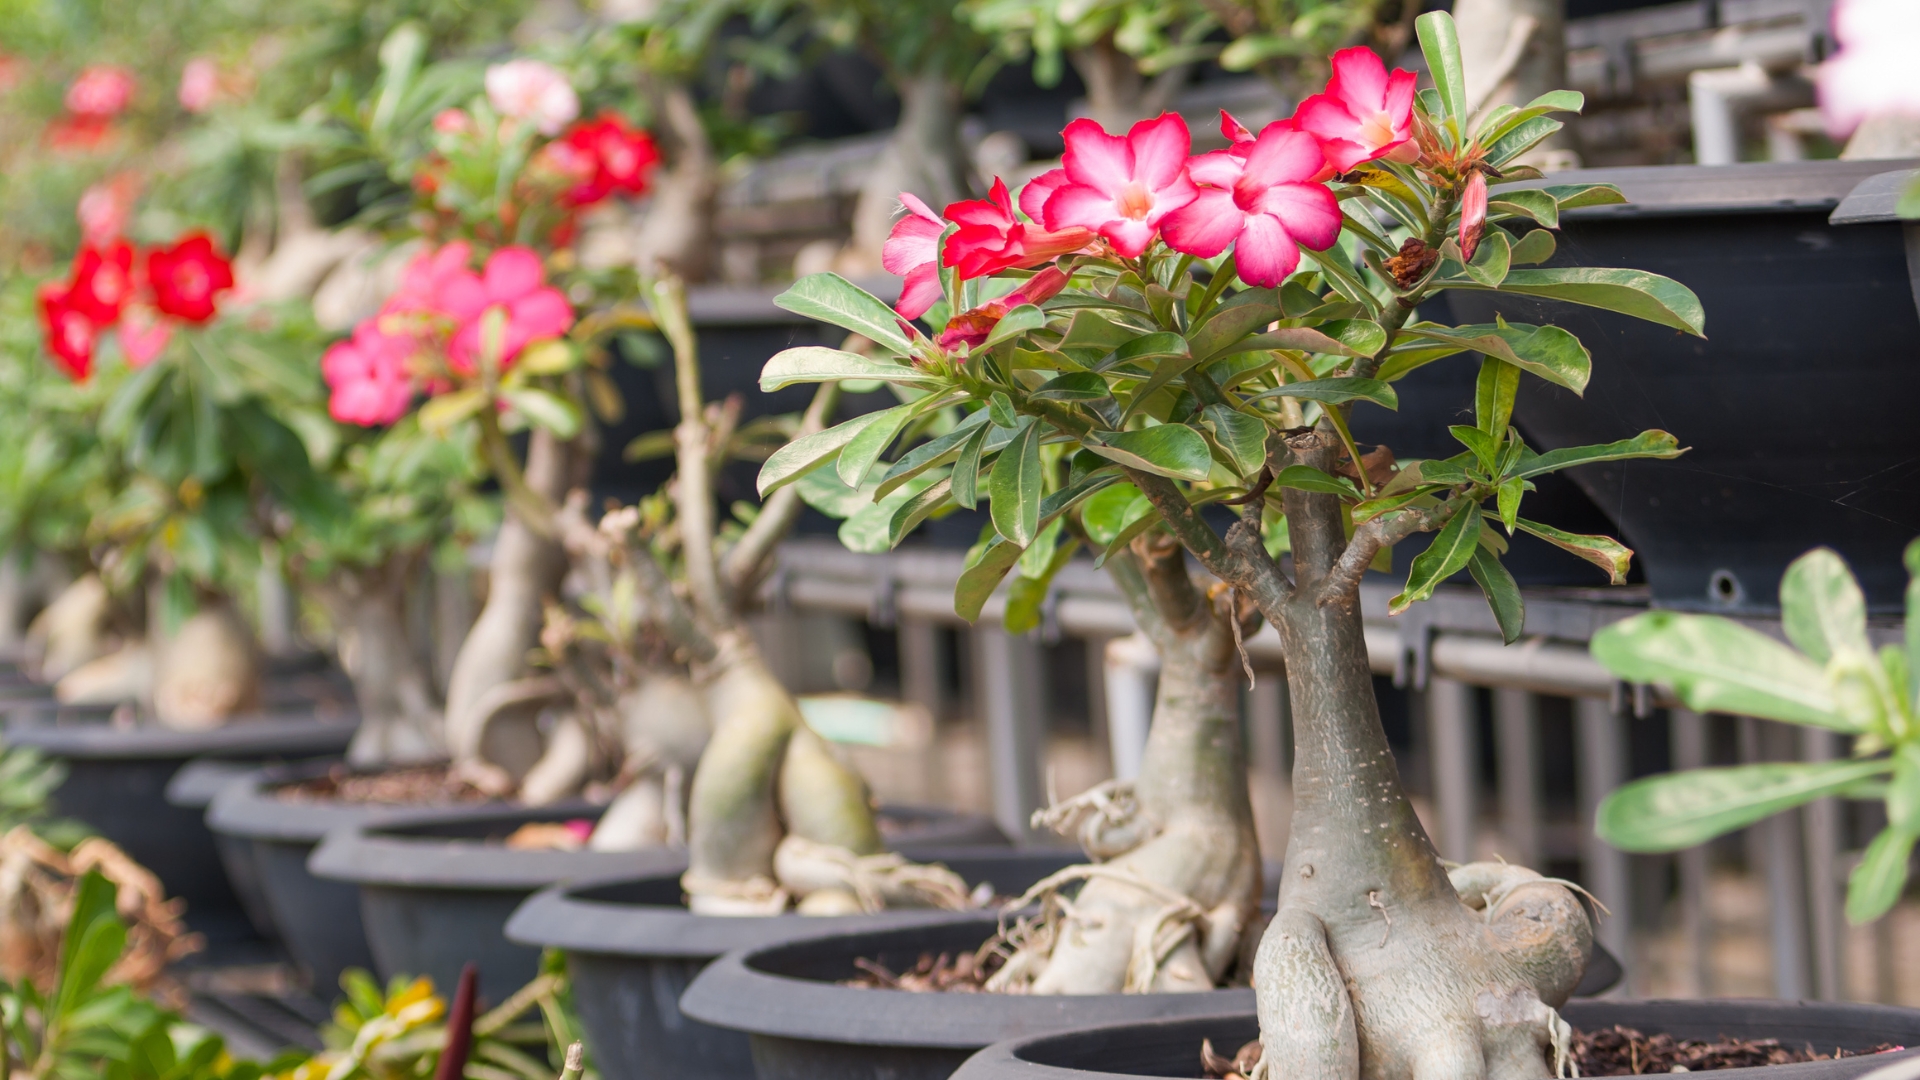 How To Grow And Care For Desert Rose Succulents